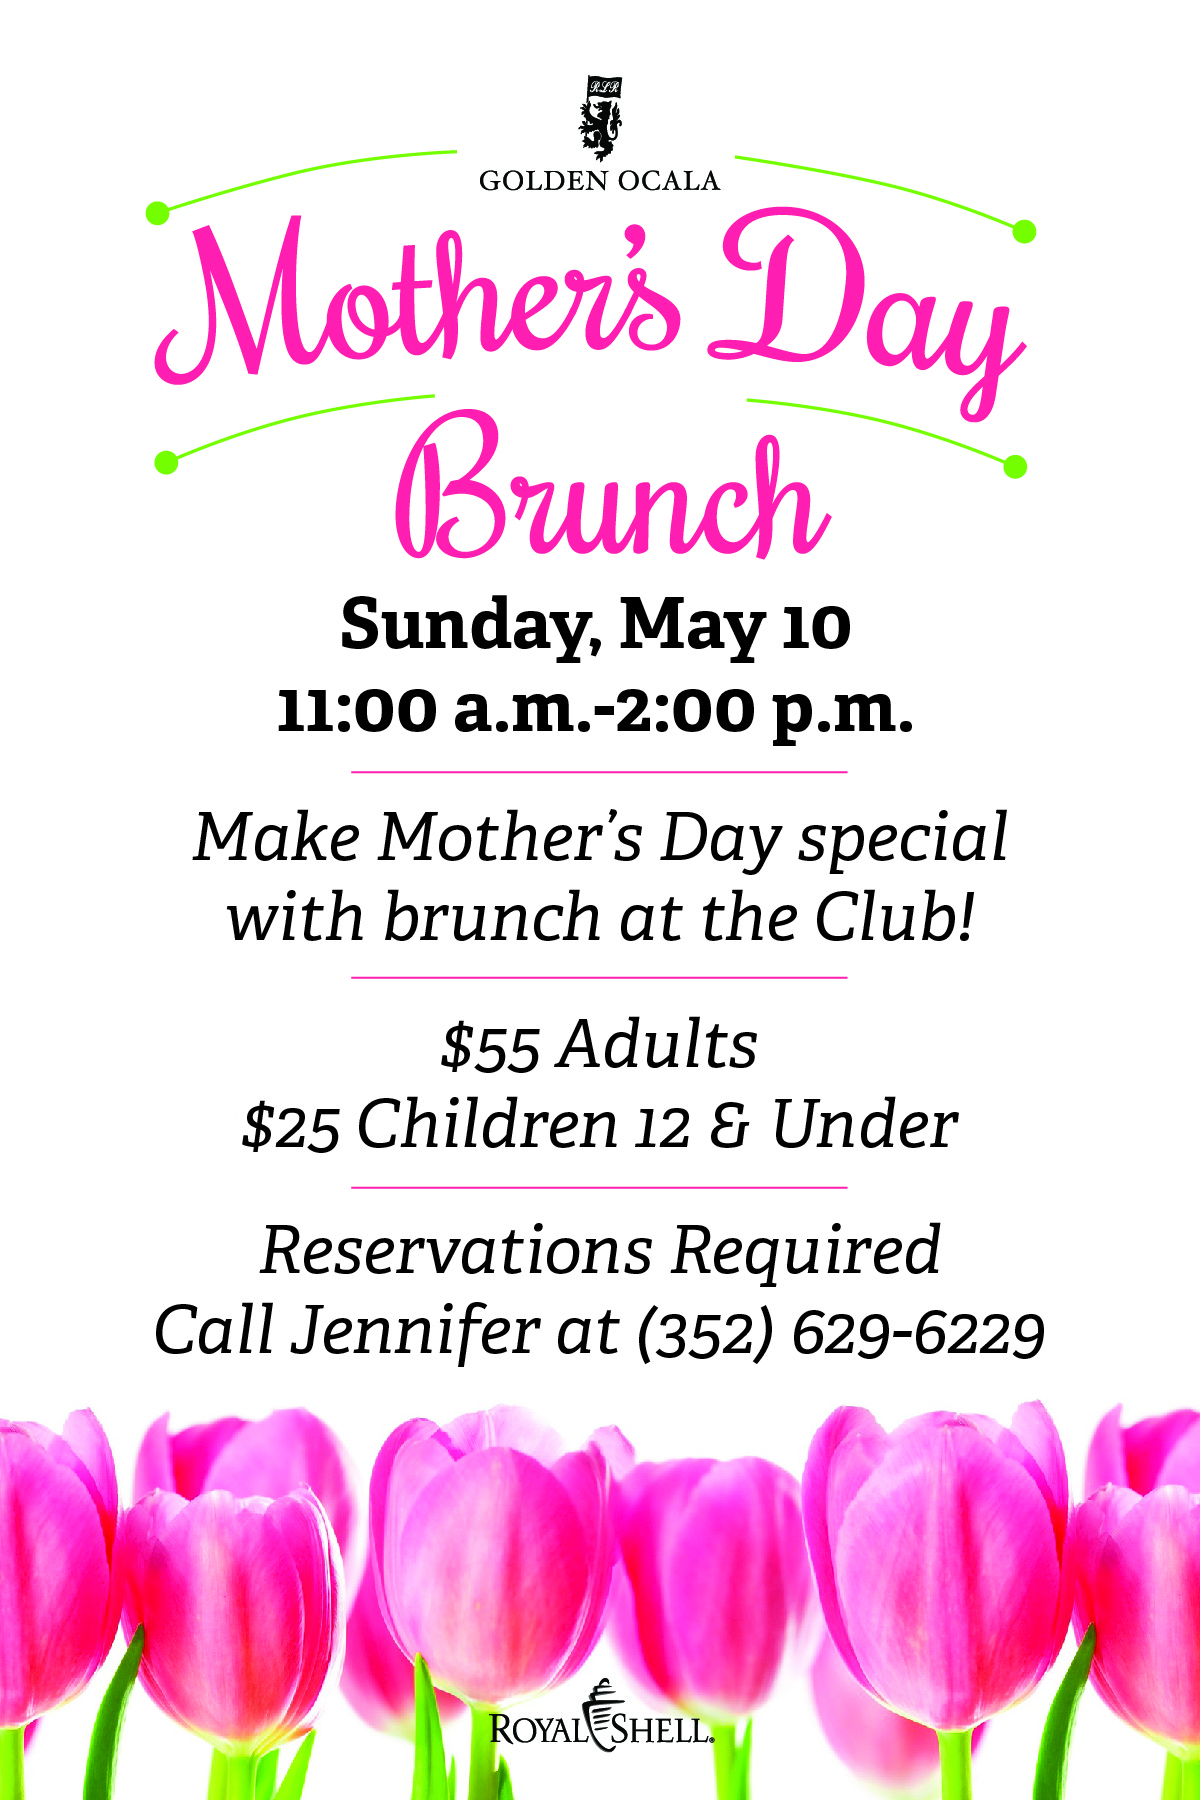 Things to Do for Mom on Her Special Day - Mother's Day